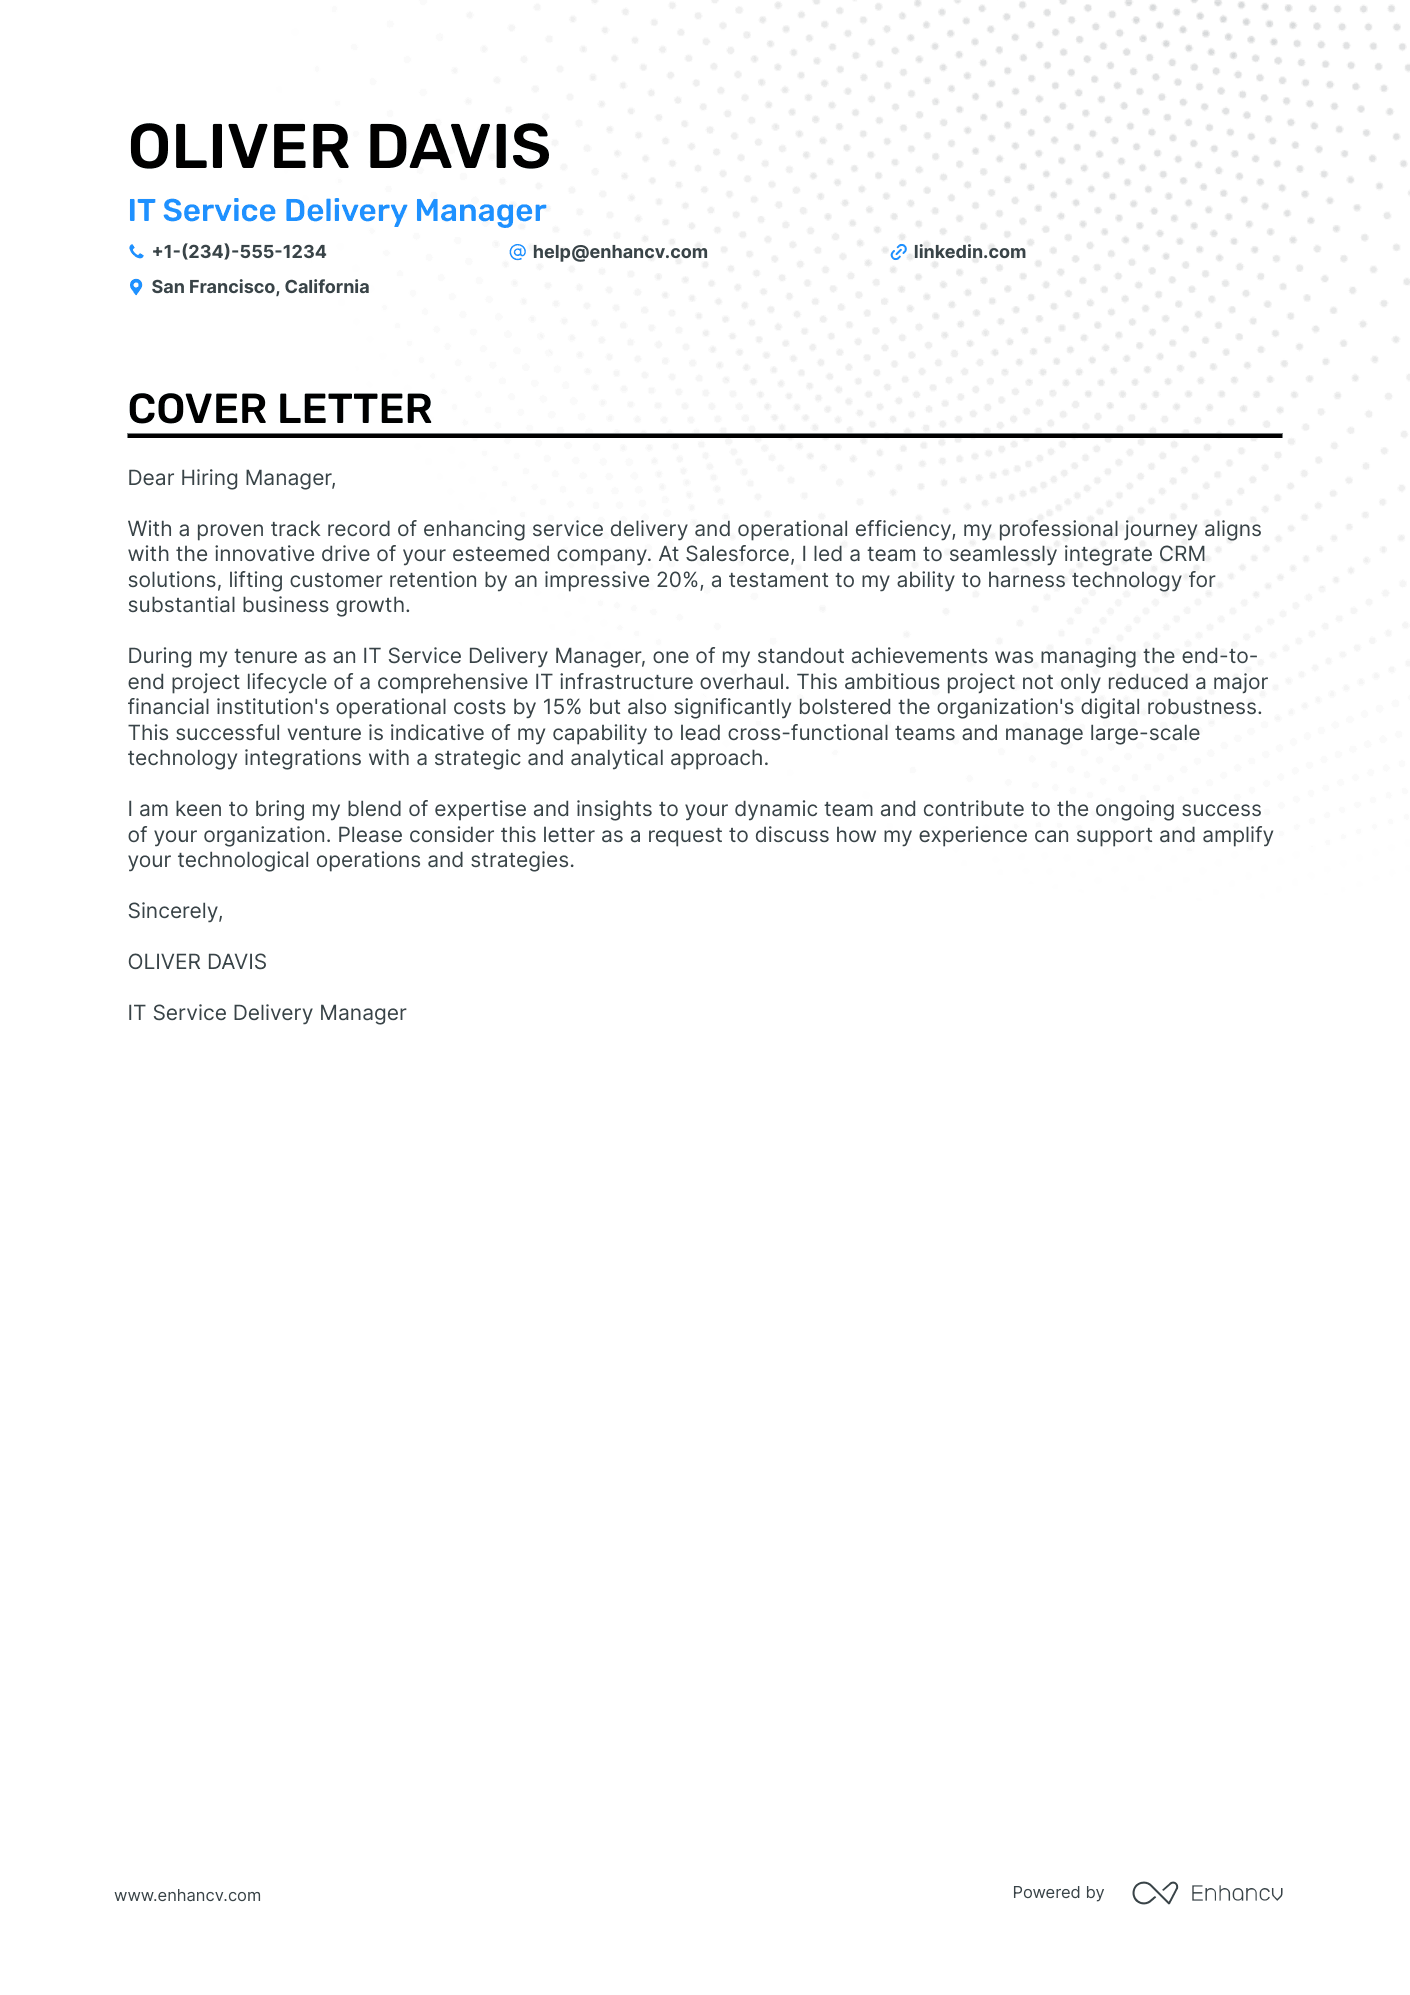 IT Service Delivery Manager cover letter